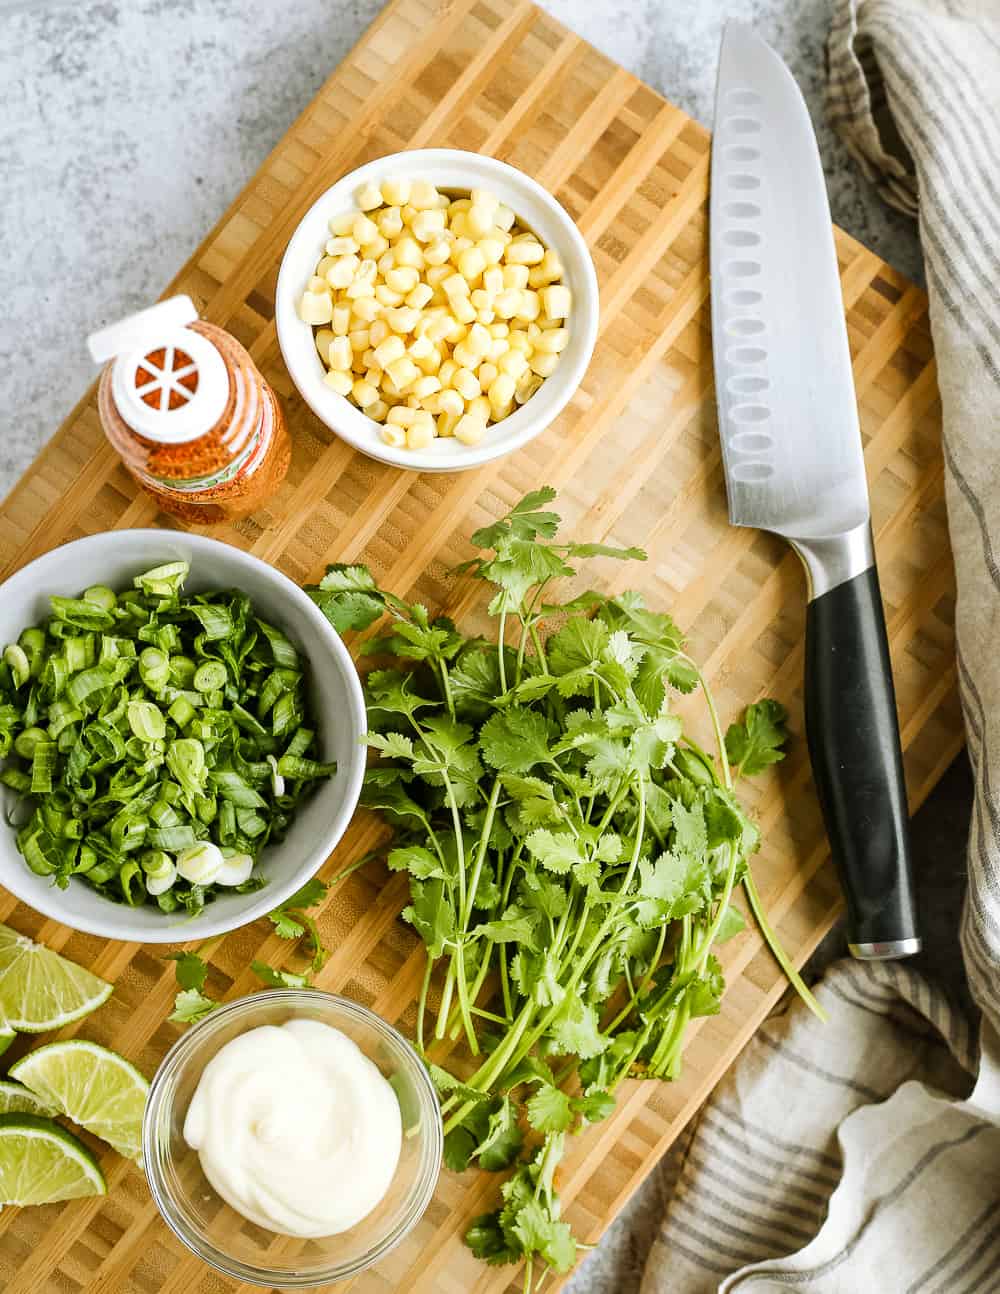 Overhead view of a butcher block cutting board with chopped green onions, fresh cilantro, sweet corn, lime wedges, a small clear glass bowl of mayo, and a sharpened chefs knife